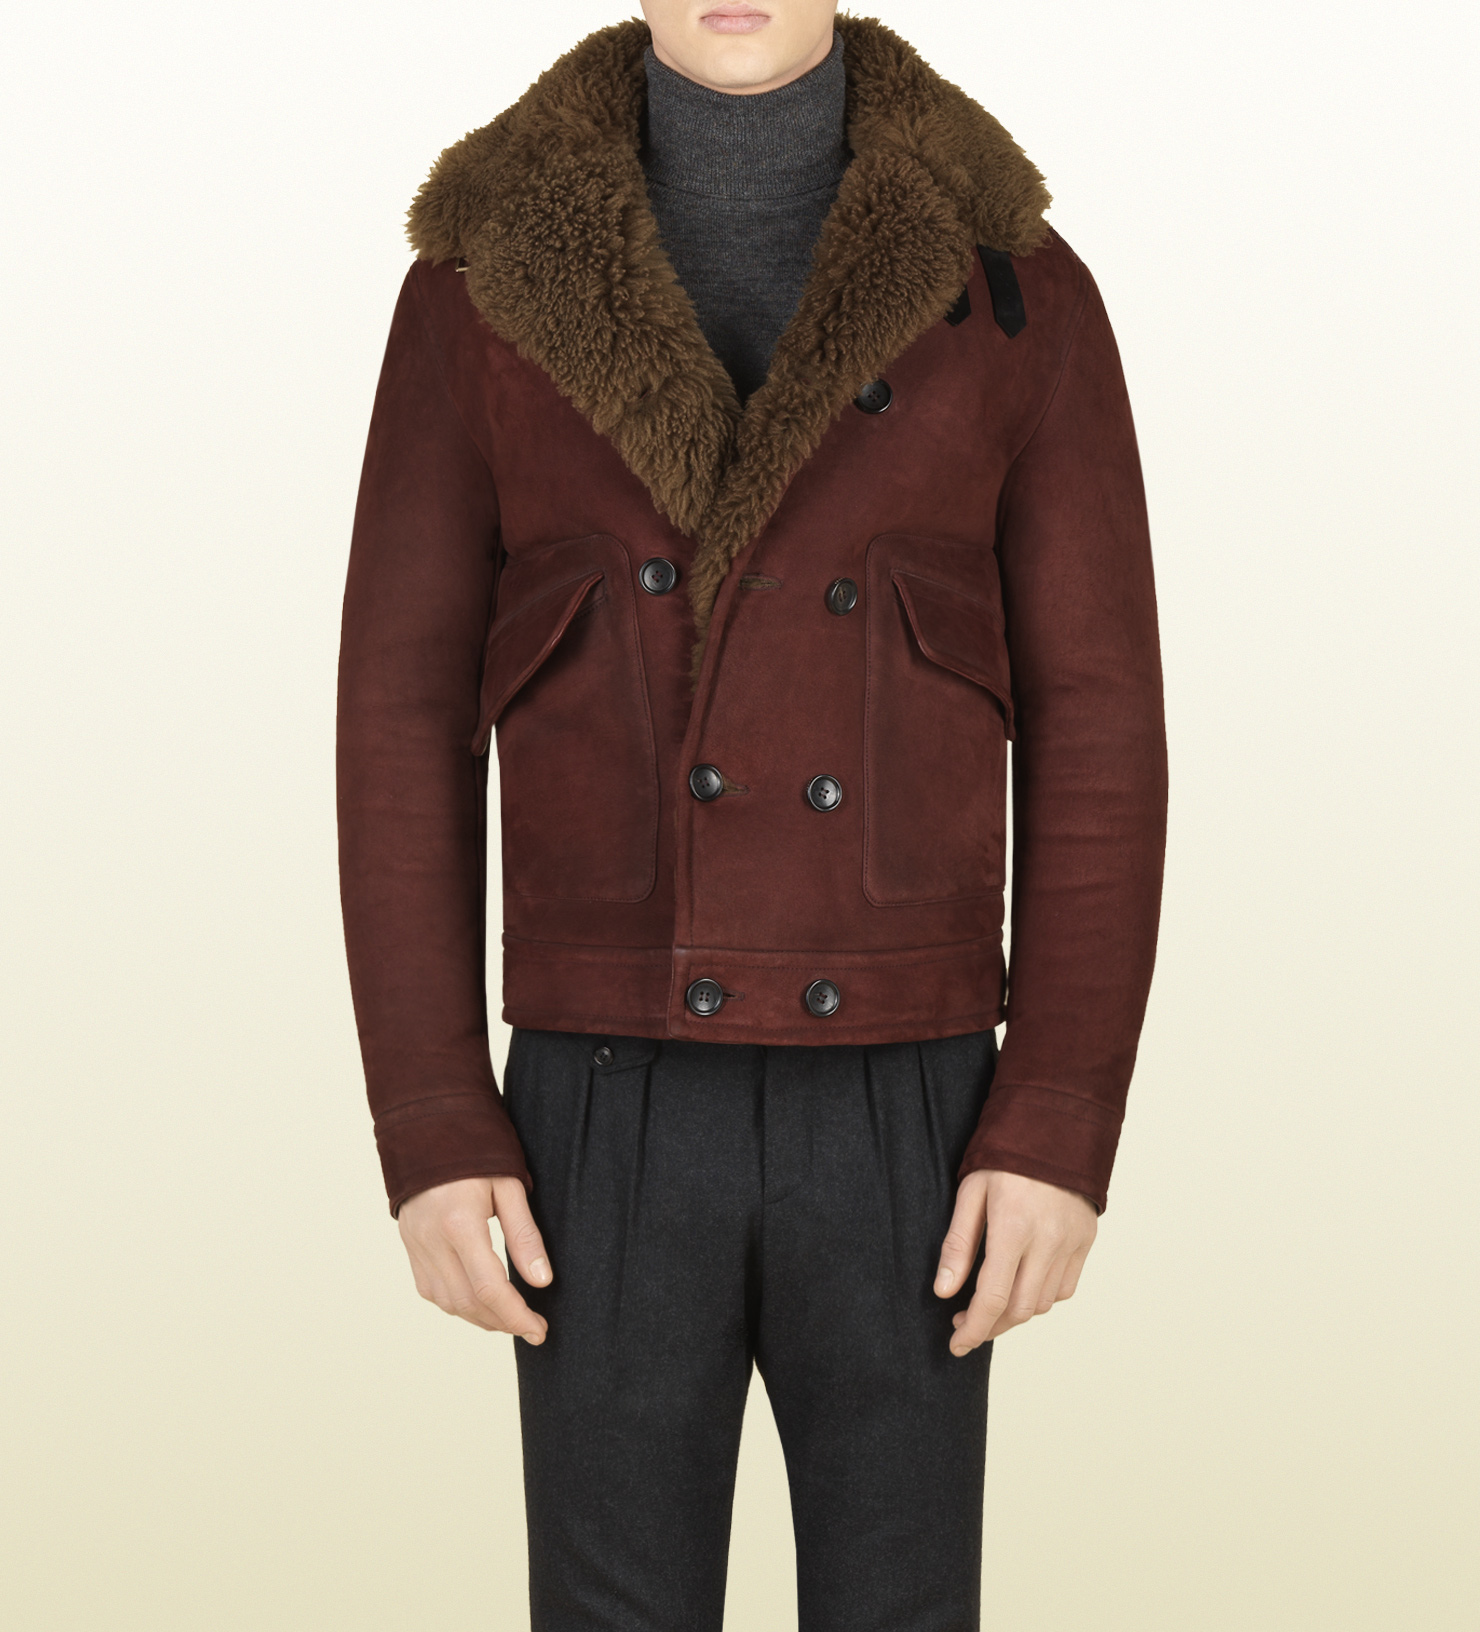 Gucci Shearling Jacket with Leather 